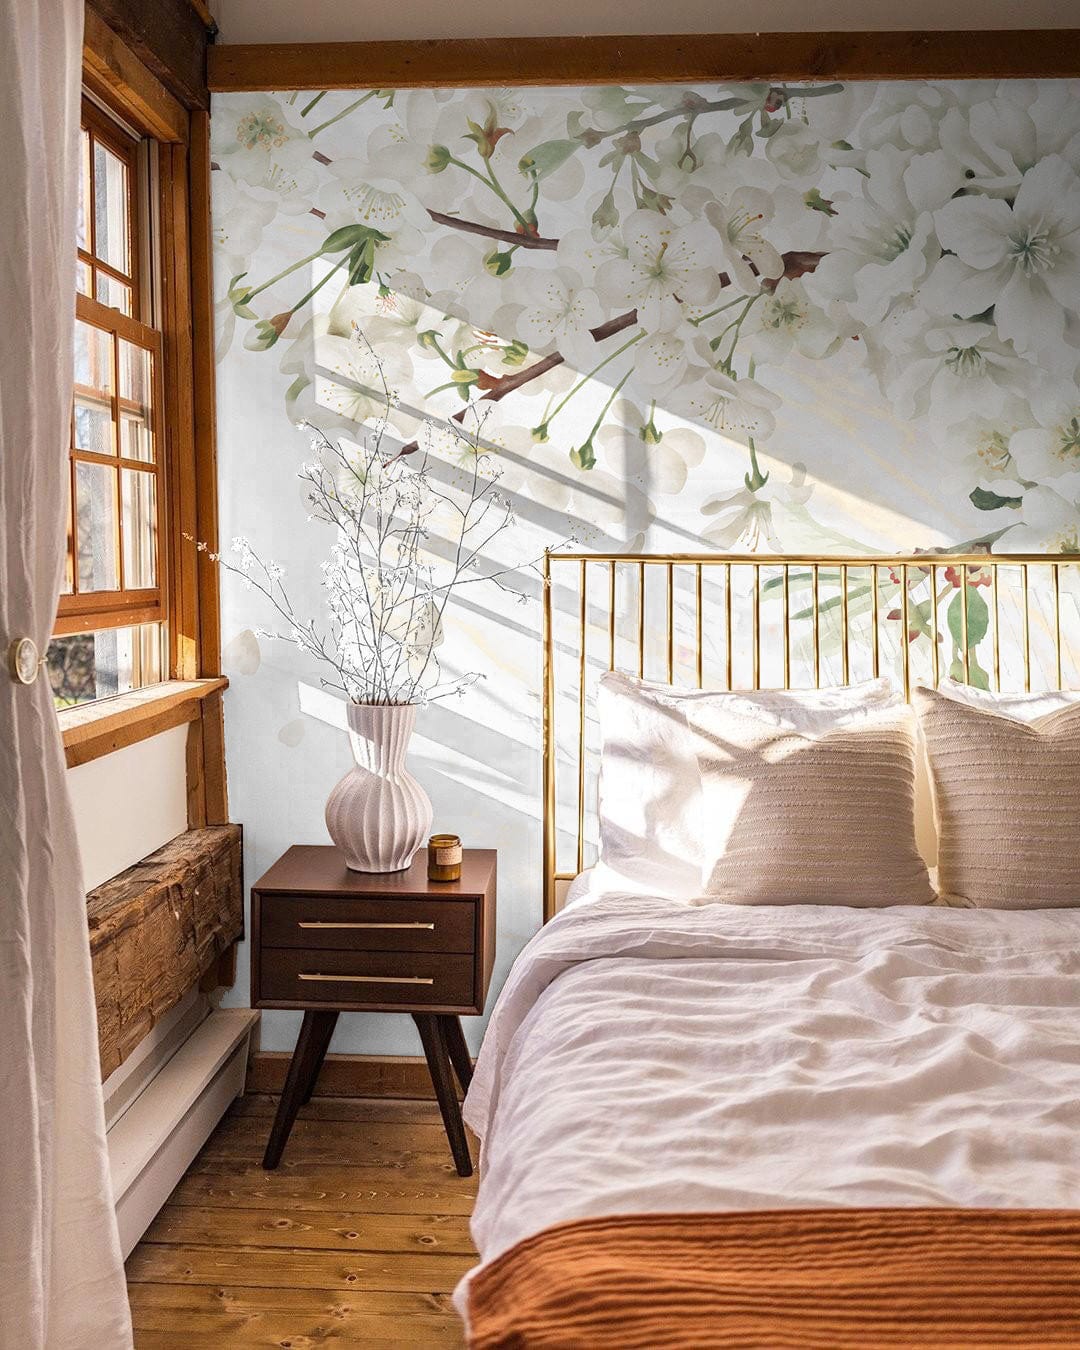 To decorate a bedroom, one might choose a wallpaper mural of pure pear tree blooms.